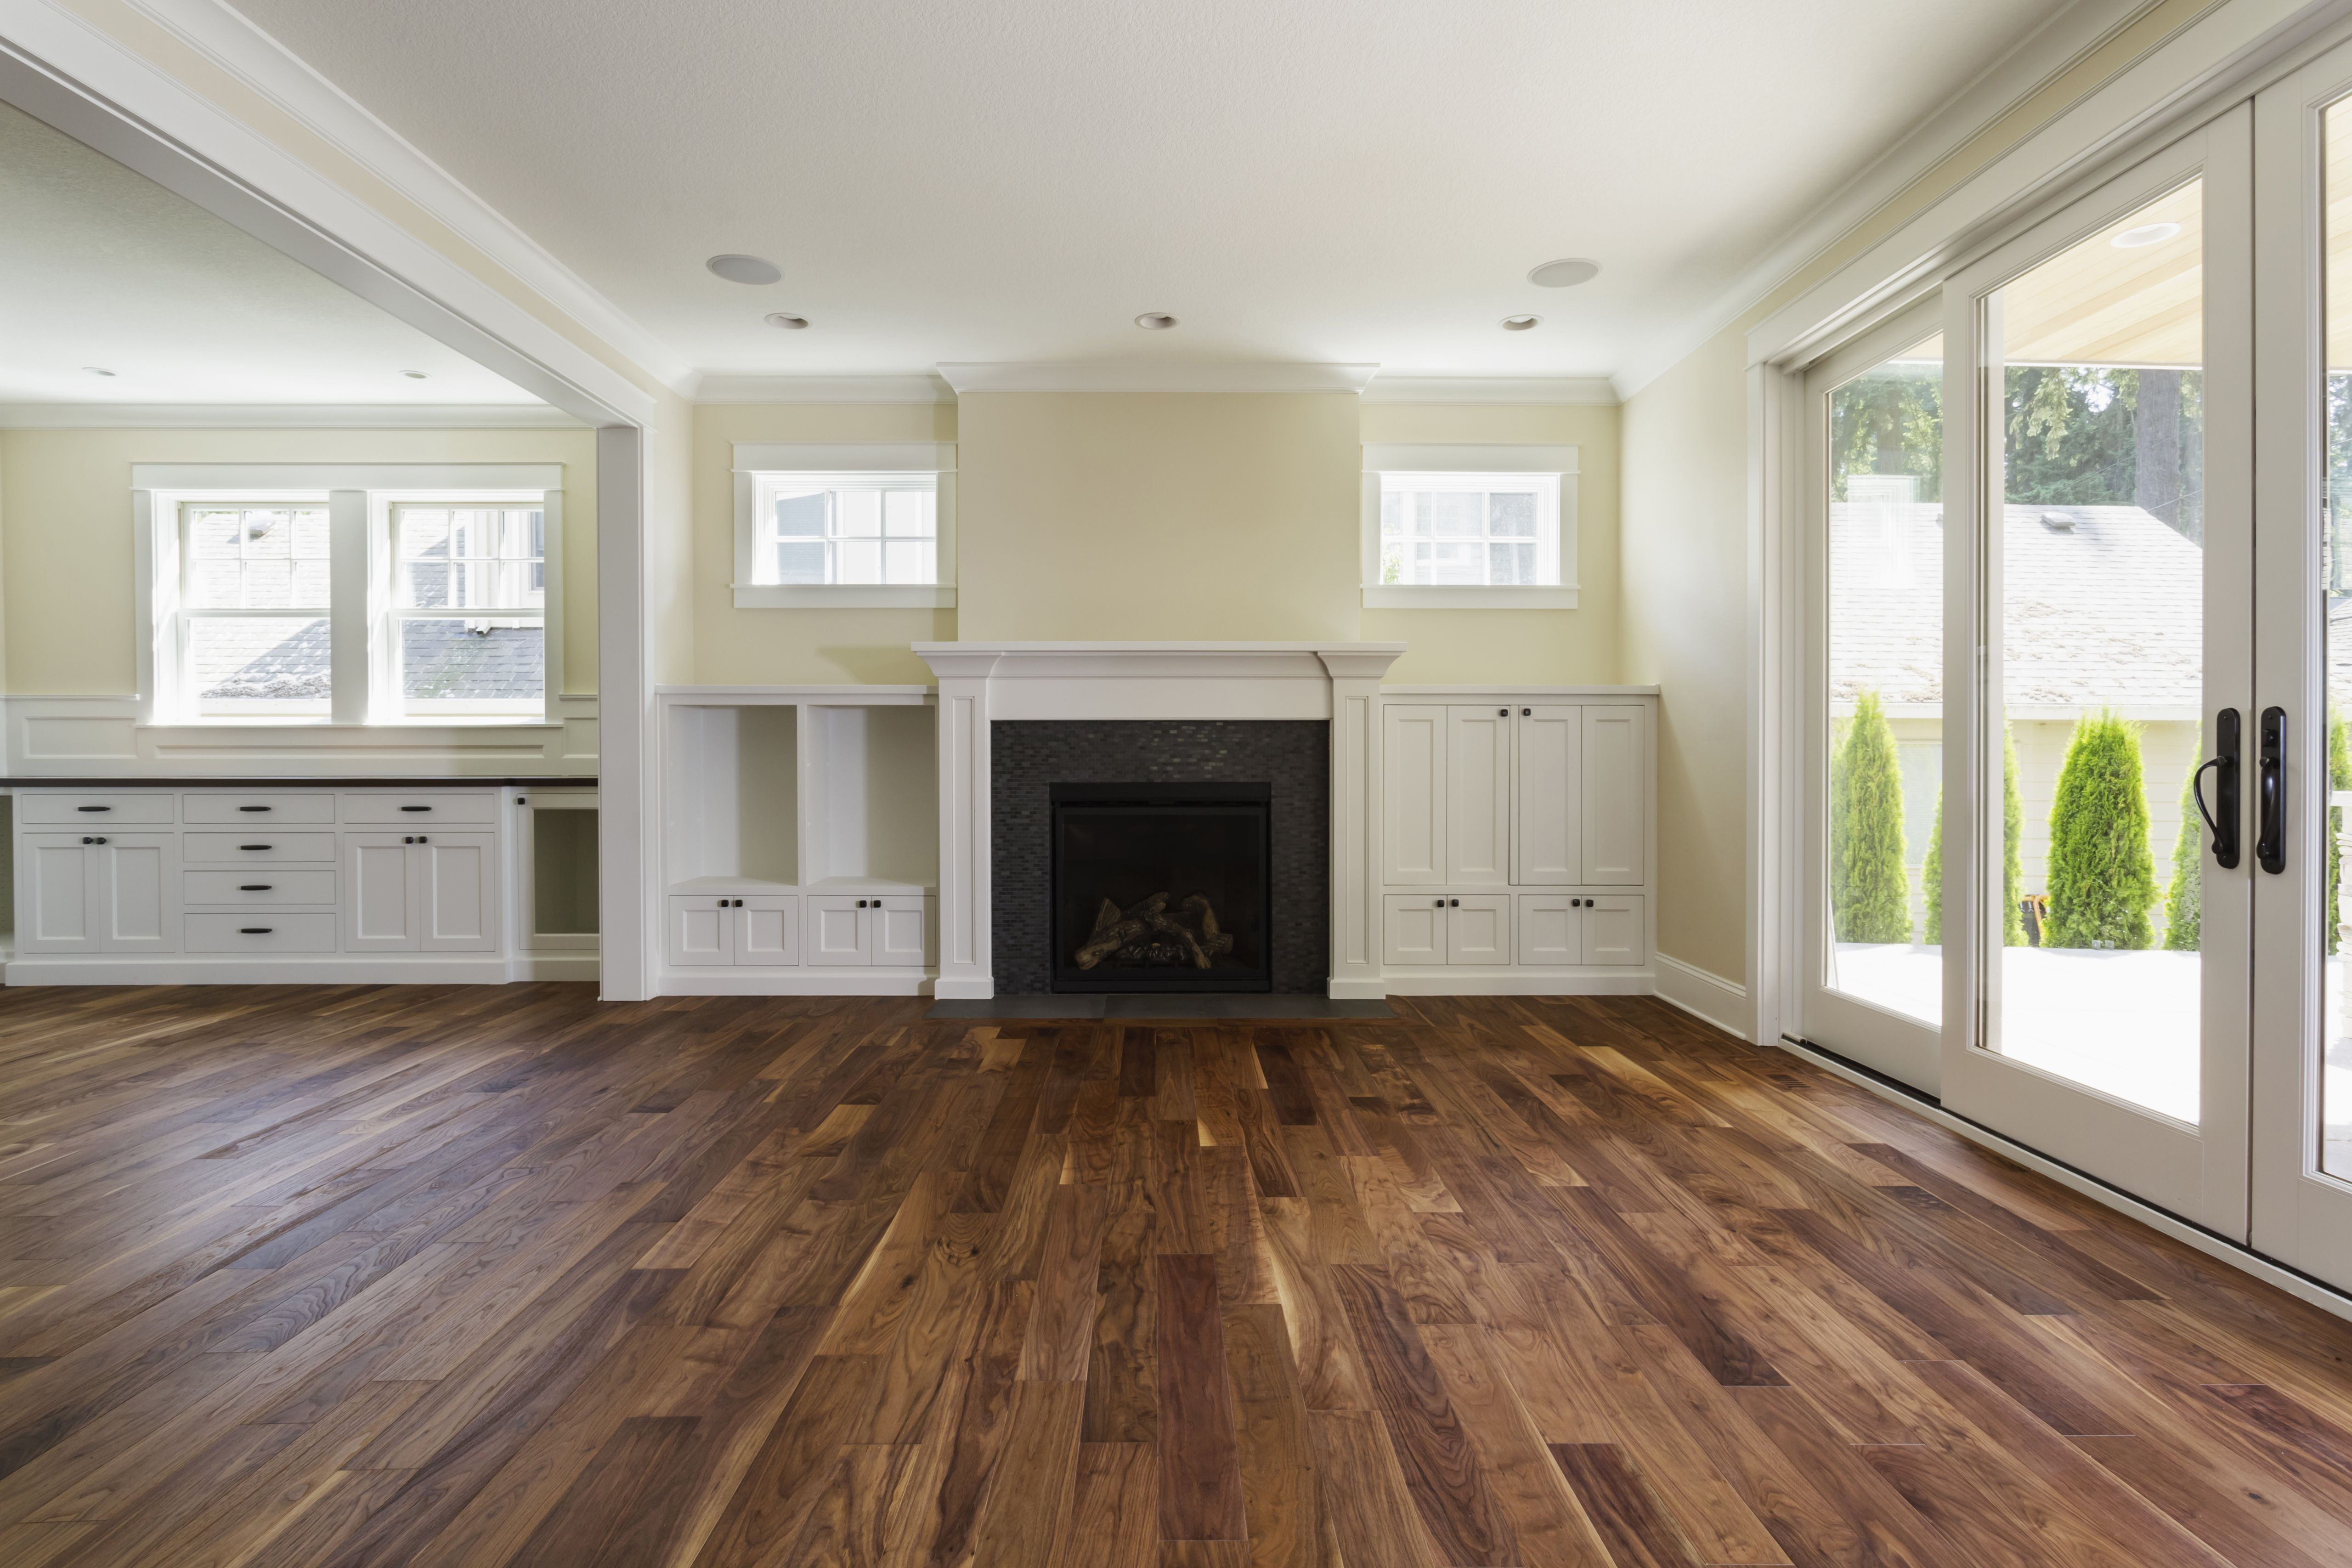 10 Trendy Hardwood Floor Repair Water Damage 2024 free download hardwood floor repair water damage of the pros and cons of prefinished hardwood flooring intended for fireplace and built in shelves in living room 482143011 57bef8e33df78cc16e035397